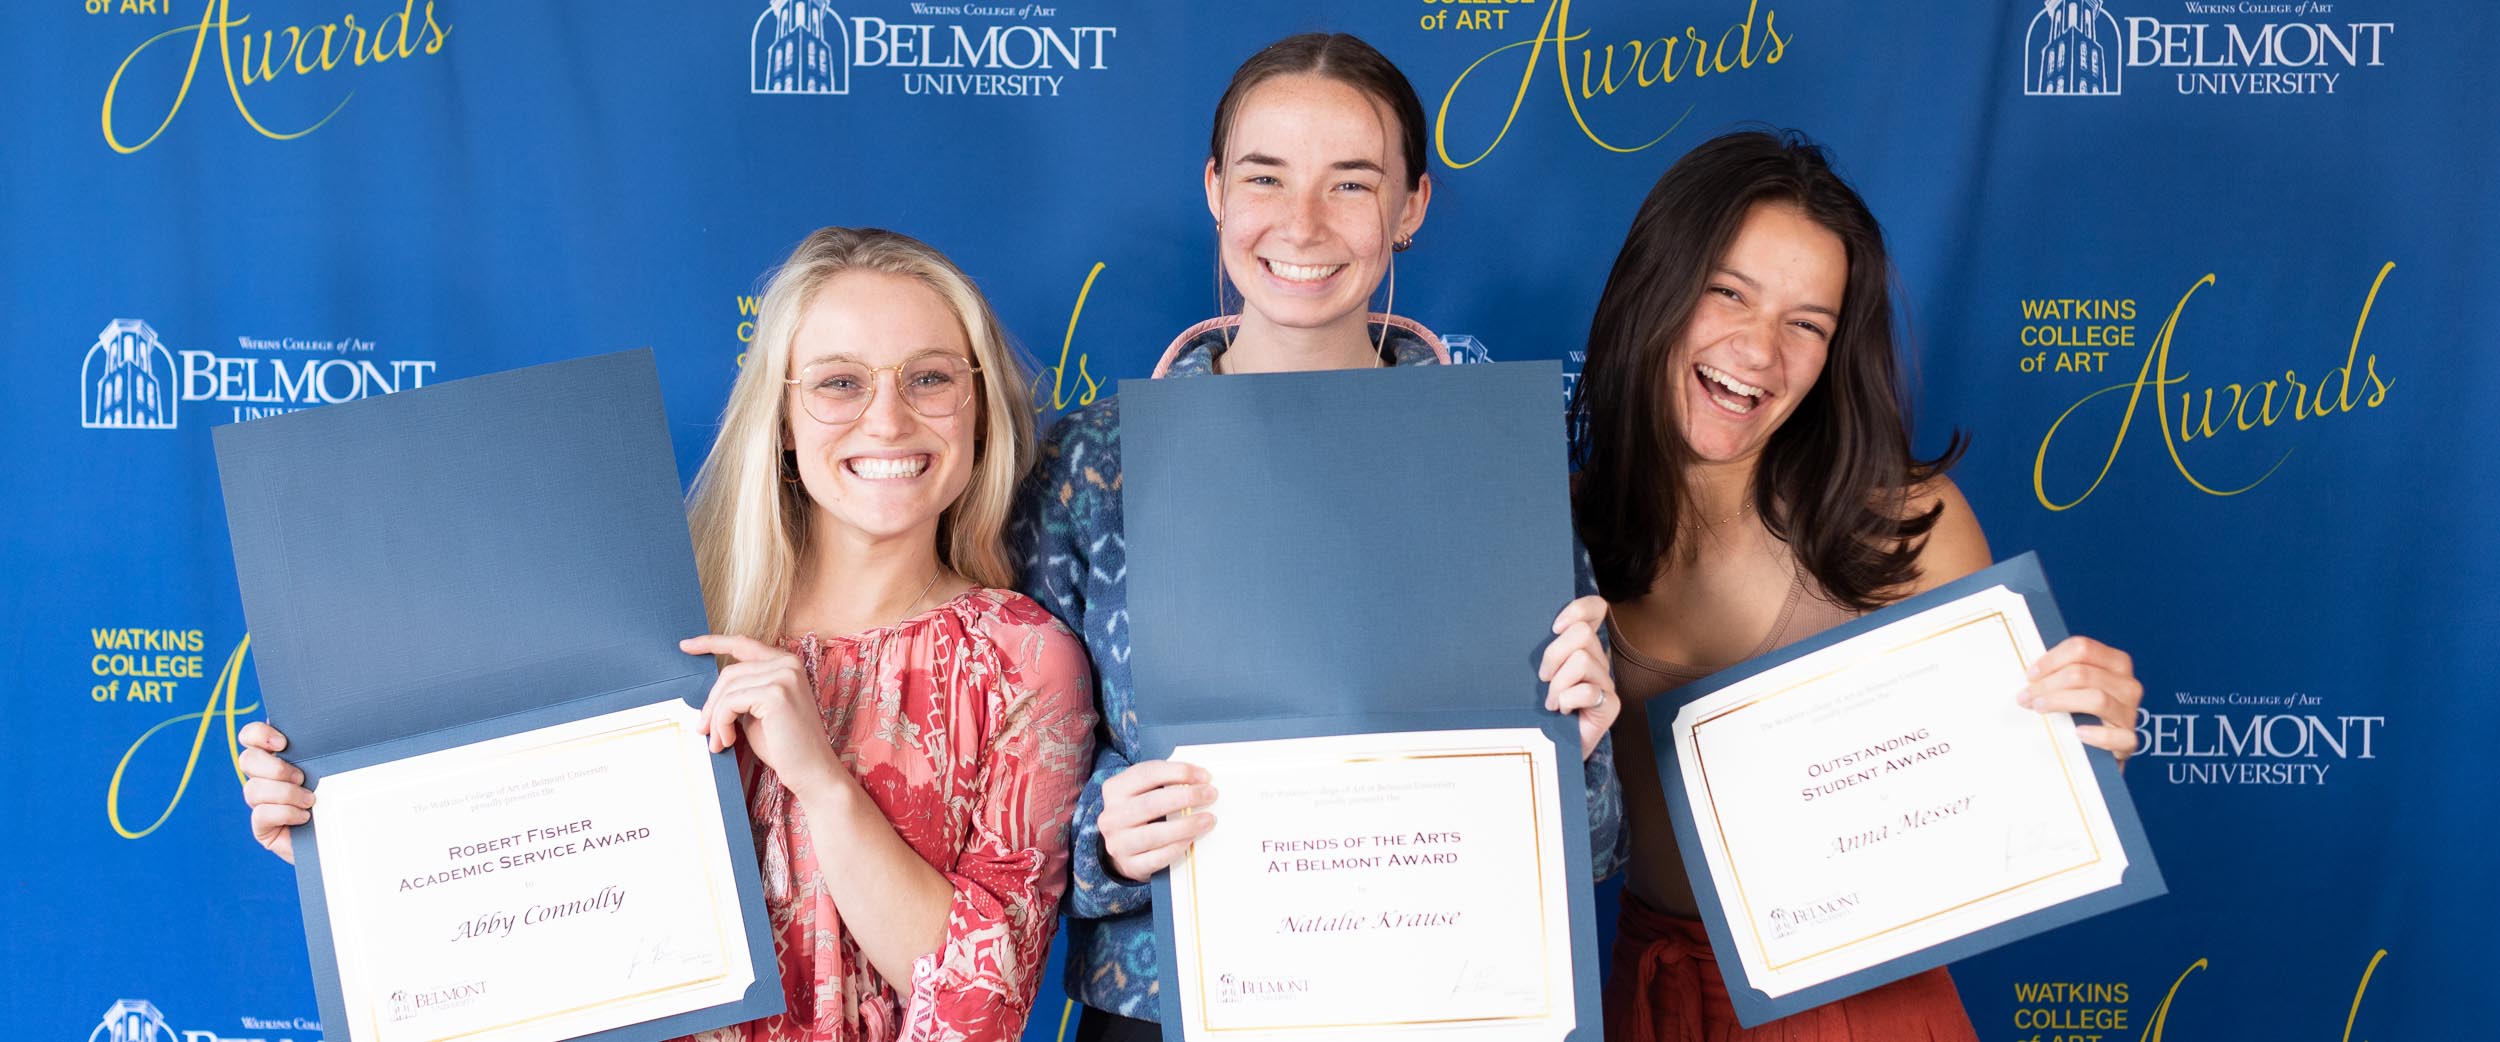 3 art student holding certificates at the watkins college of art awards ceremony